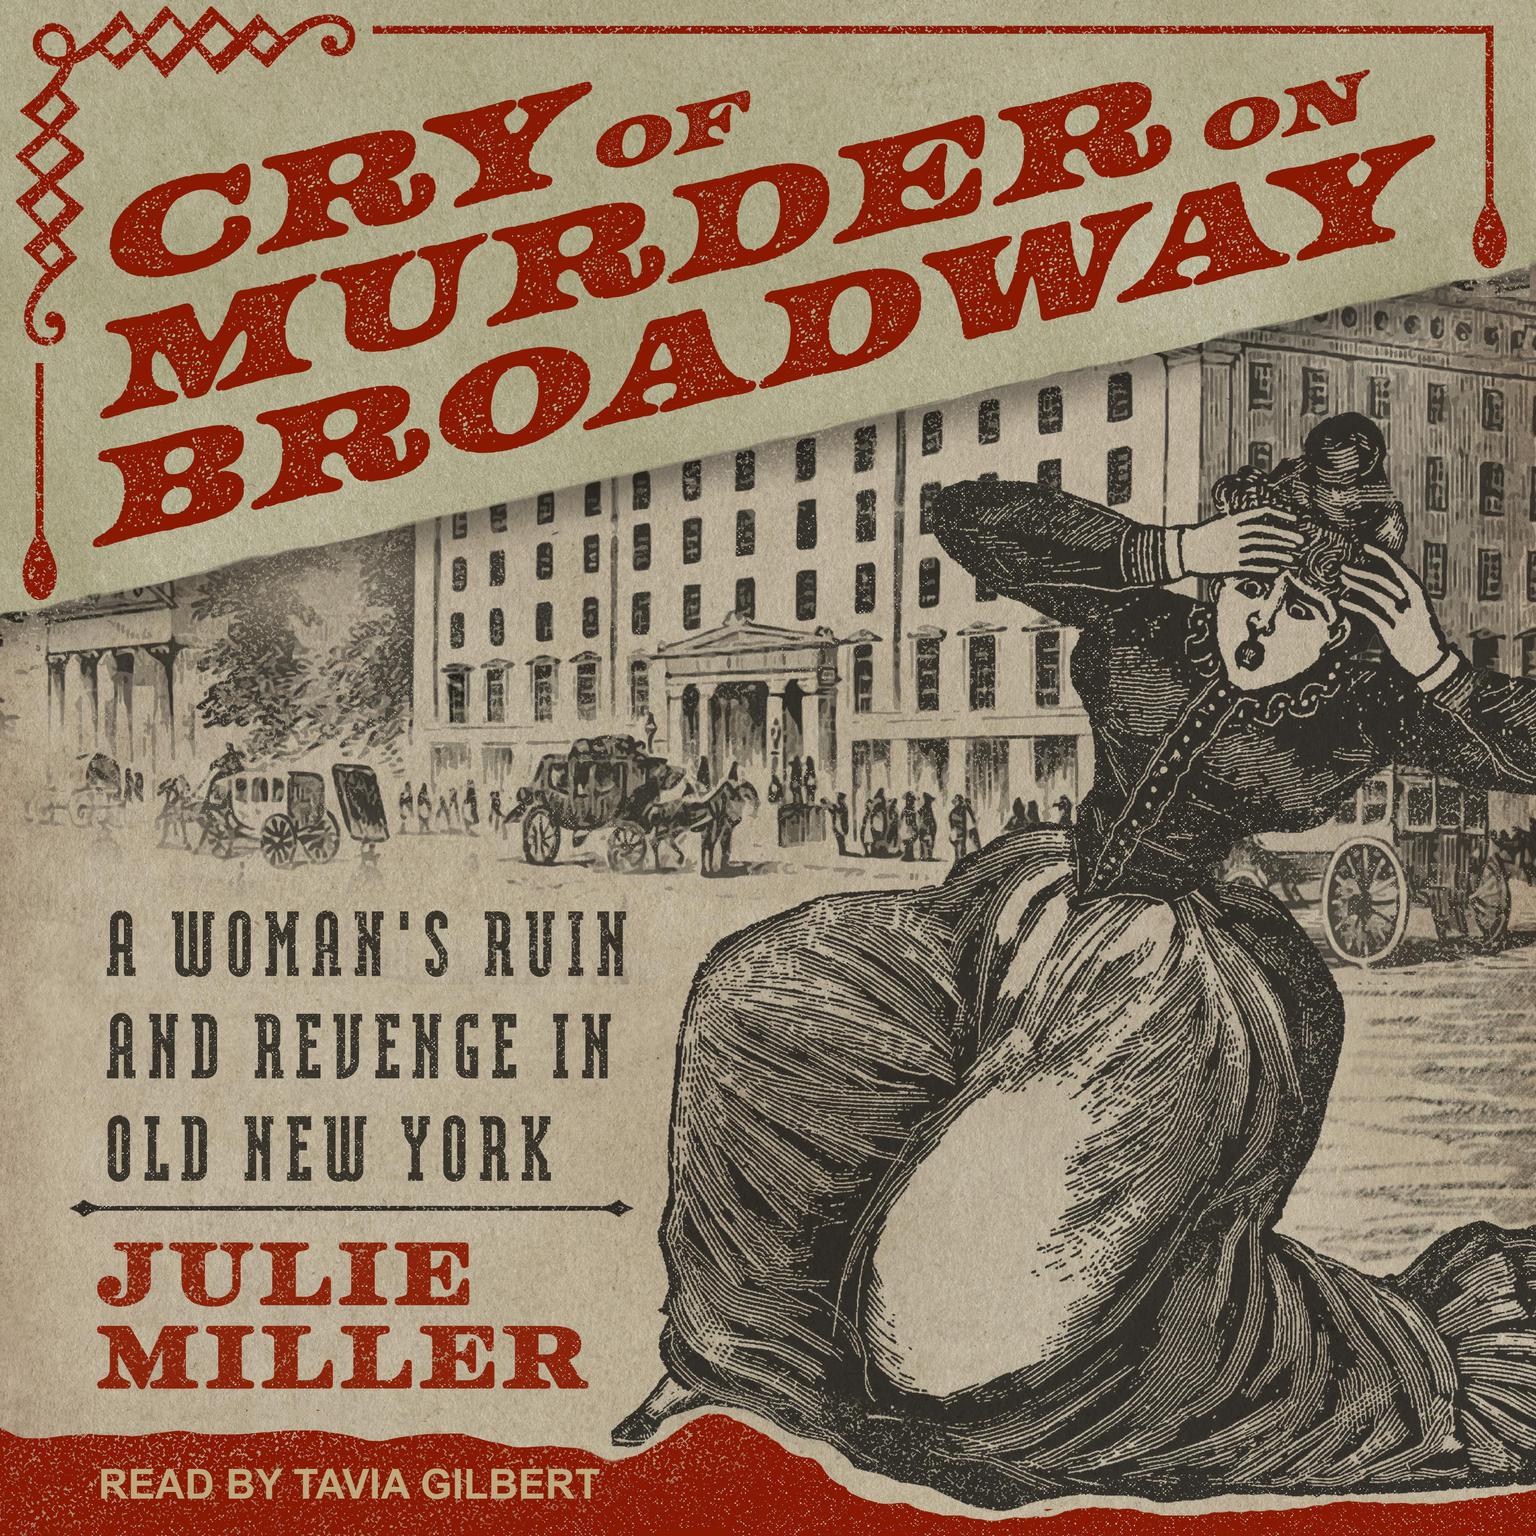 Cry of Murder on Broadway: A Womans Ruin and Revenge in Old New York Audiobook, by Julie Miller